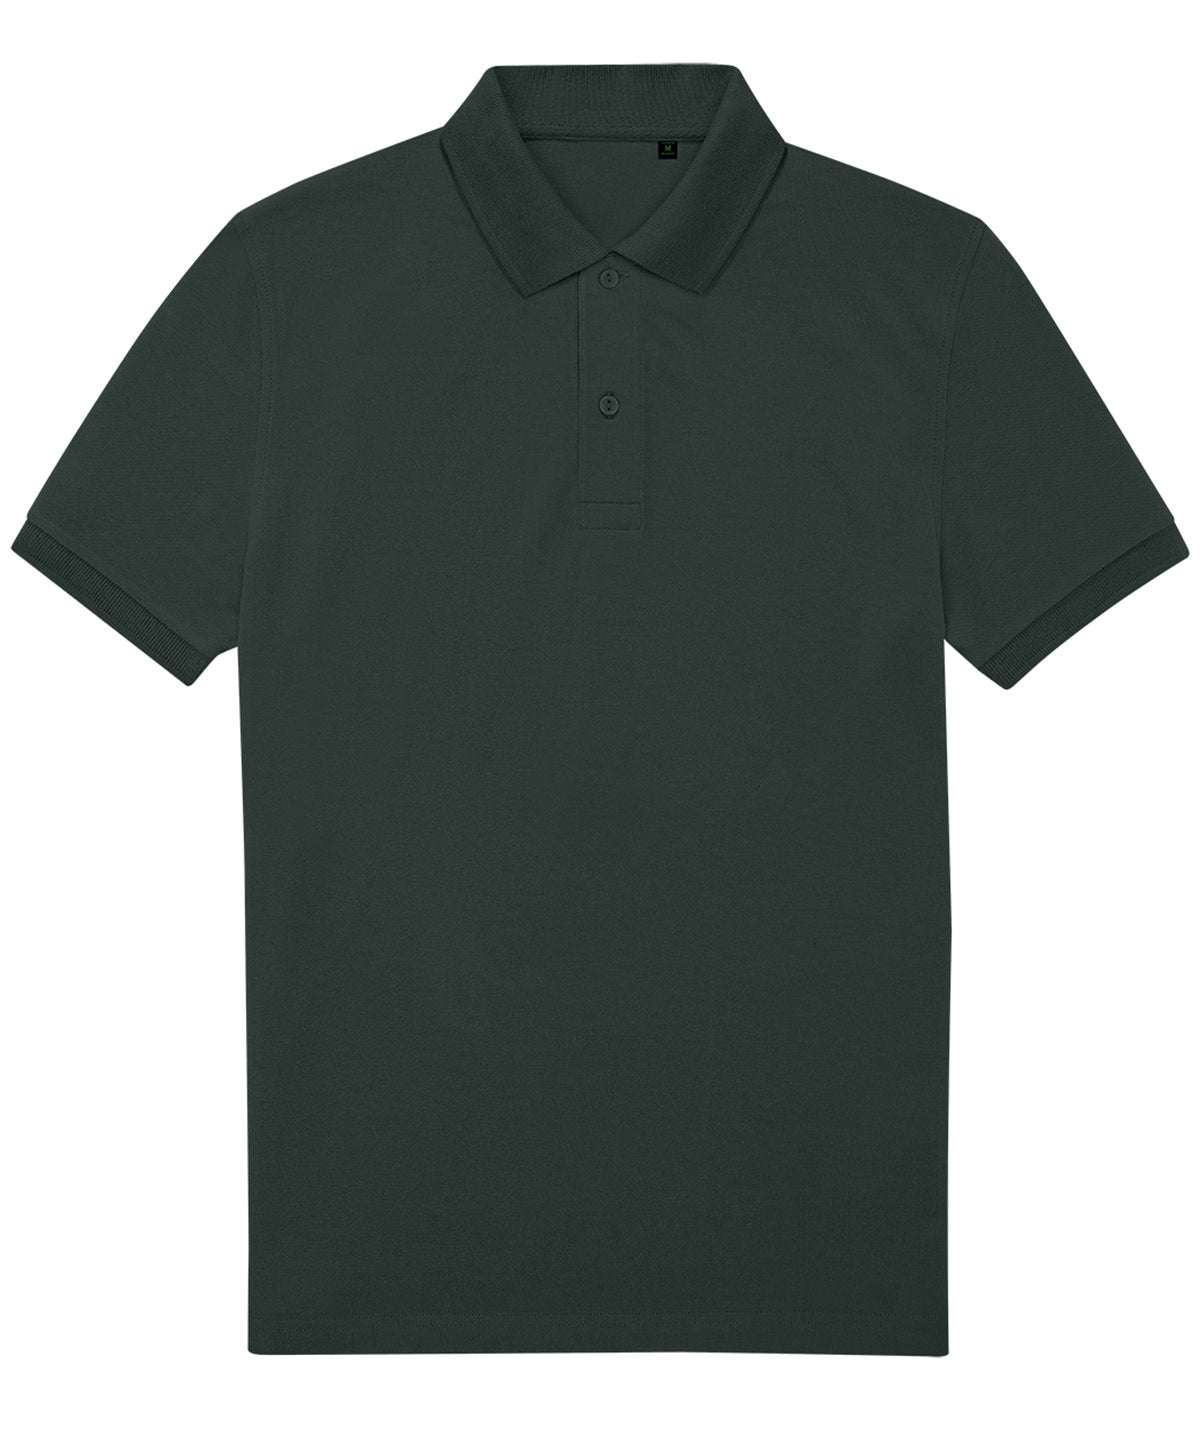 Personalised Polo Shirts - Lime B&C Collection B&C My Eco Polo 65/35